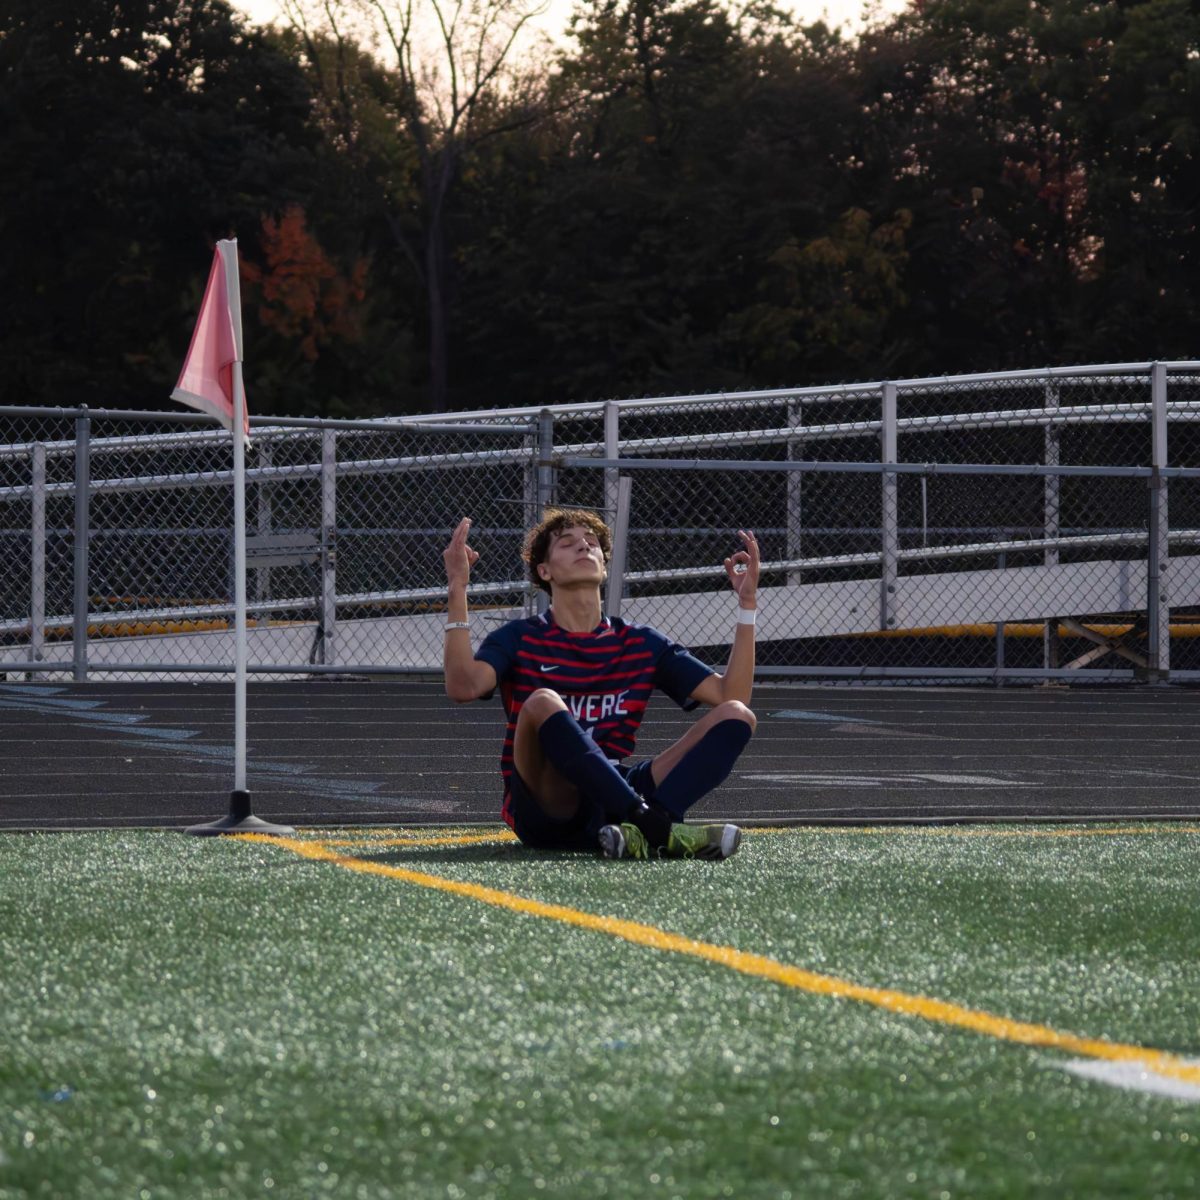 Halms celebrates after scoring his second goal during the Revere/Copley game